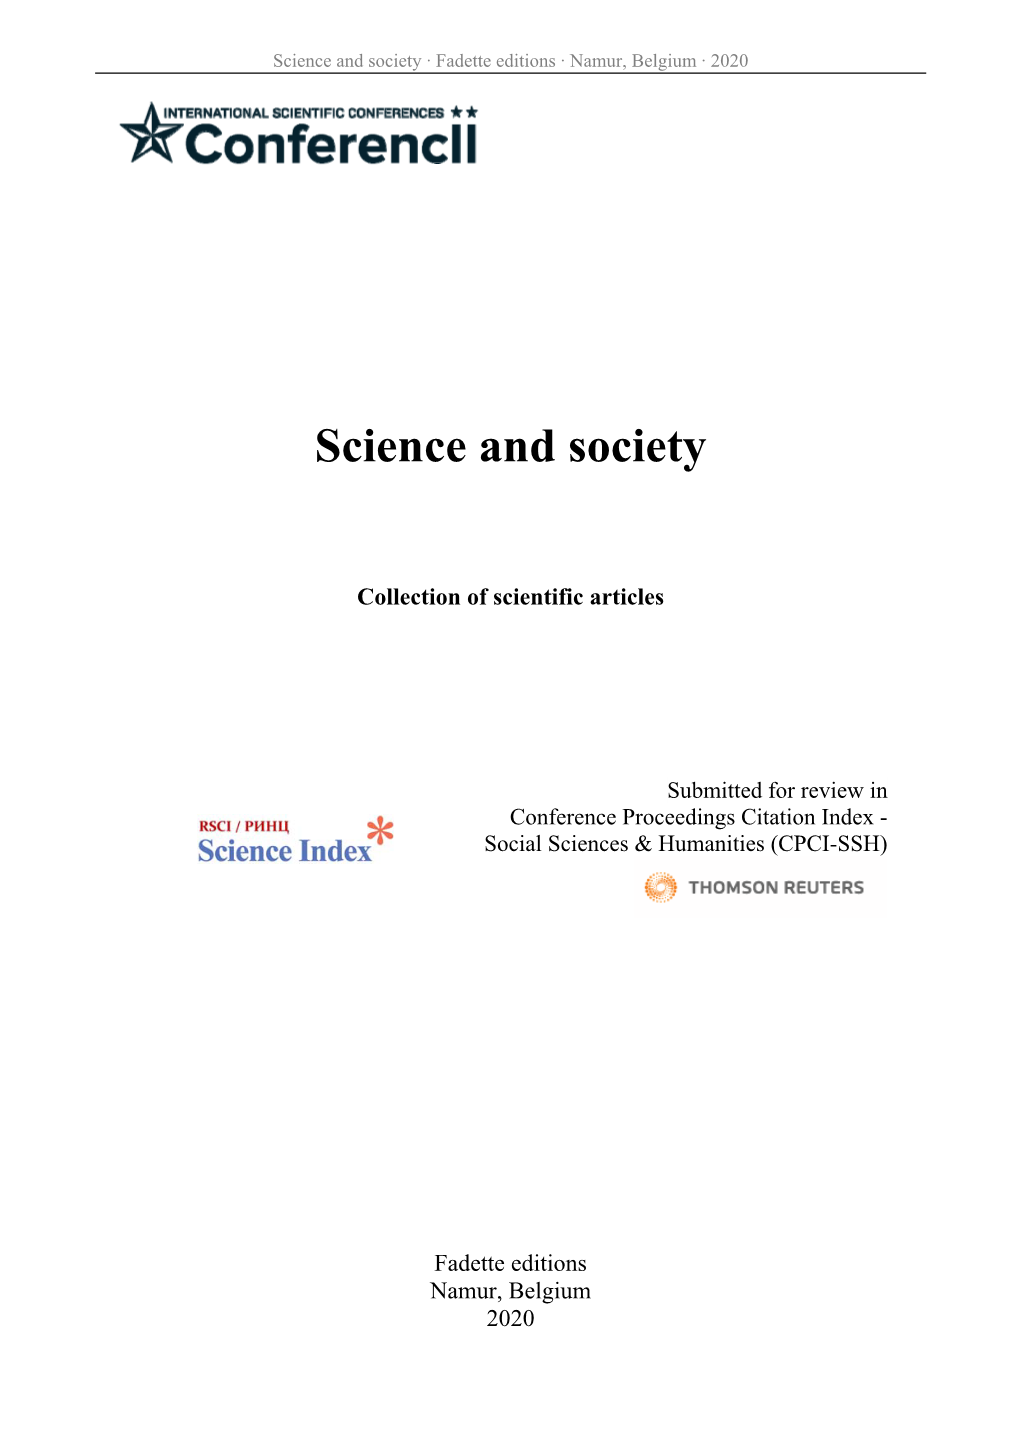 Science and Society ∙ Fadette Editions ∙ Namur, Belgium ∙ 2020